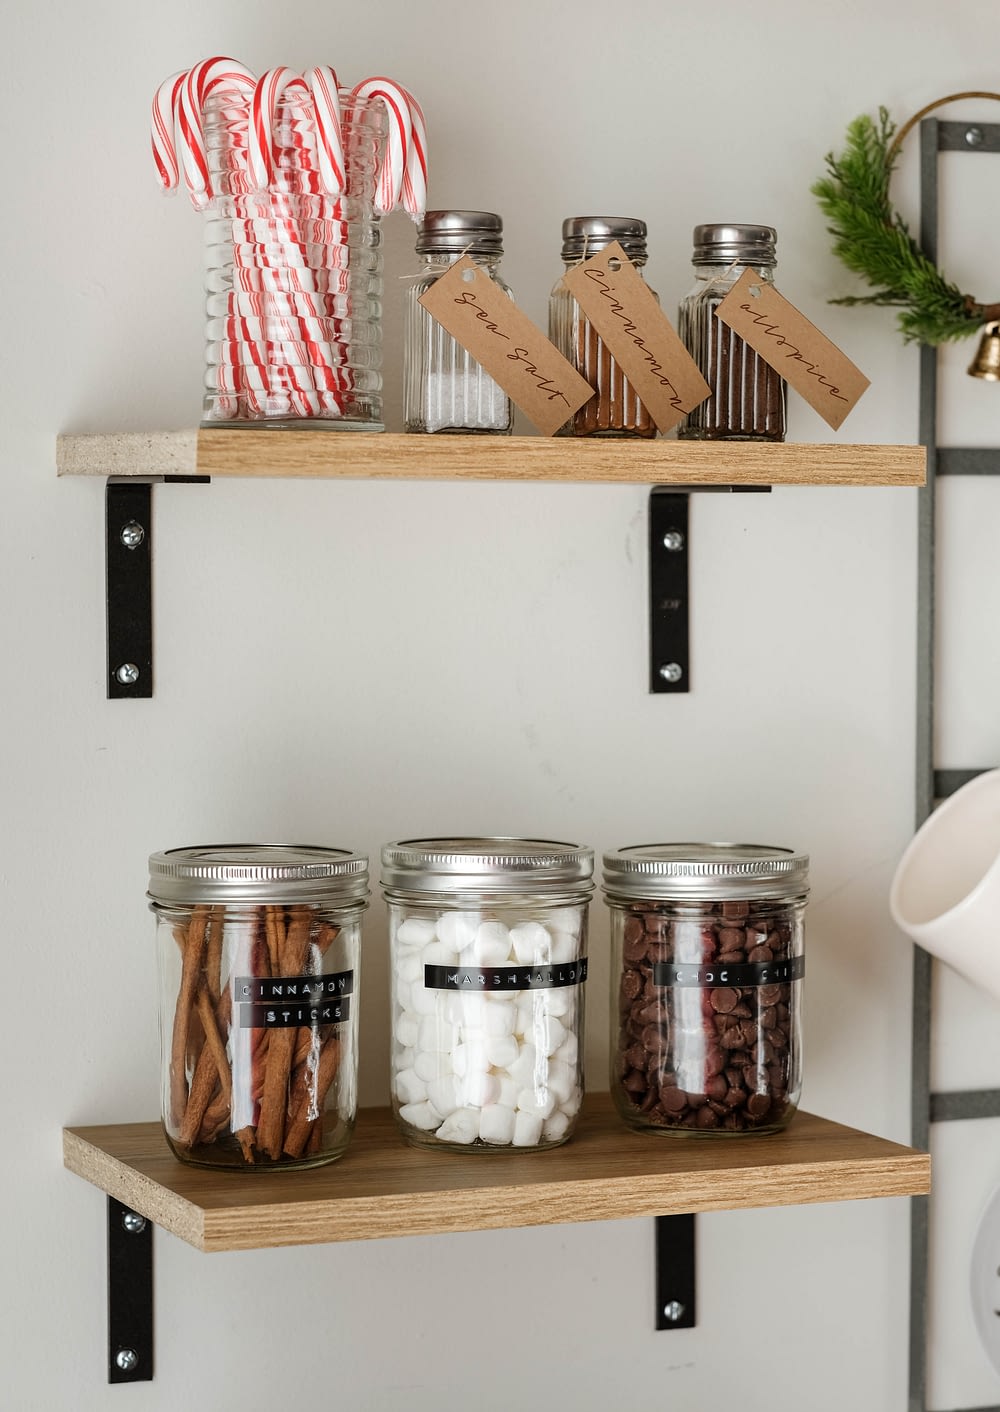 DIY Coffee Bar and hot cocoa toppings on open shelves